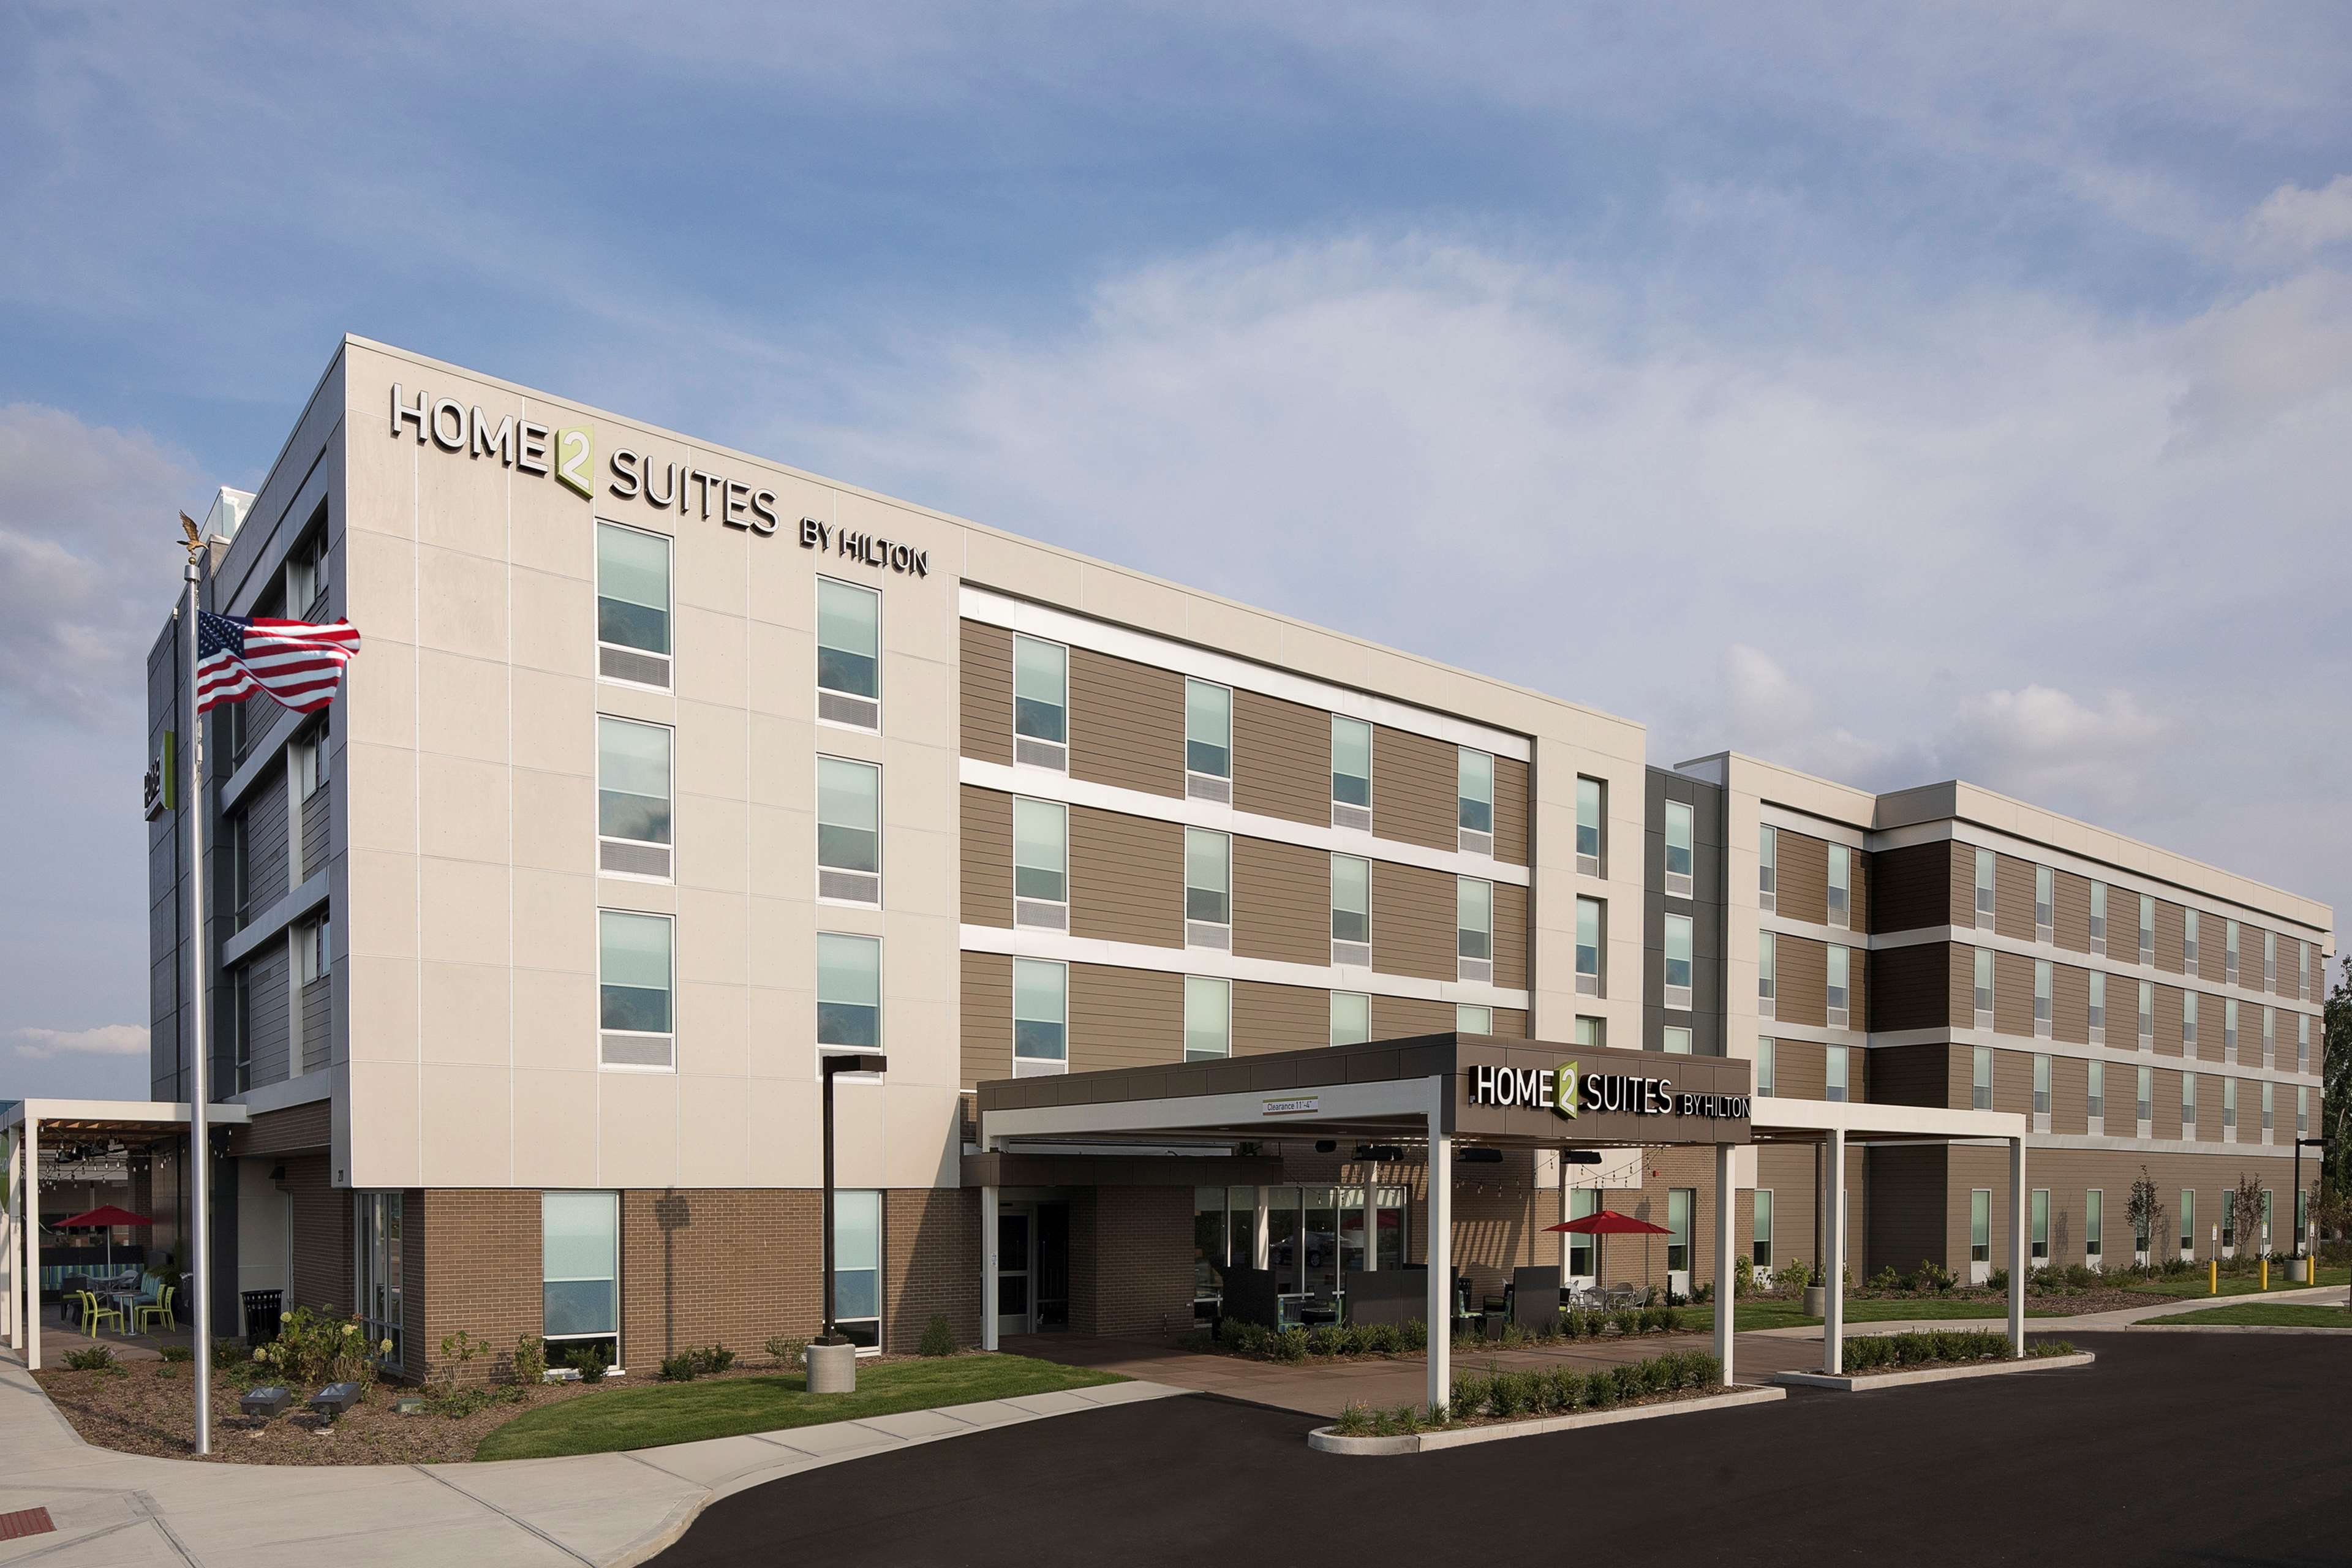 Home2 Suites by Hilton Mishawaka South Bend image